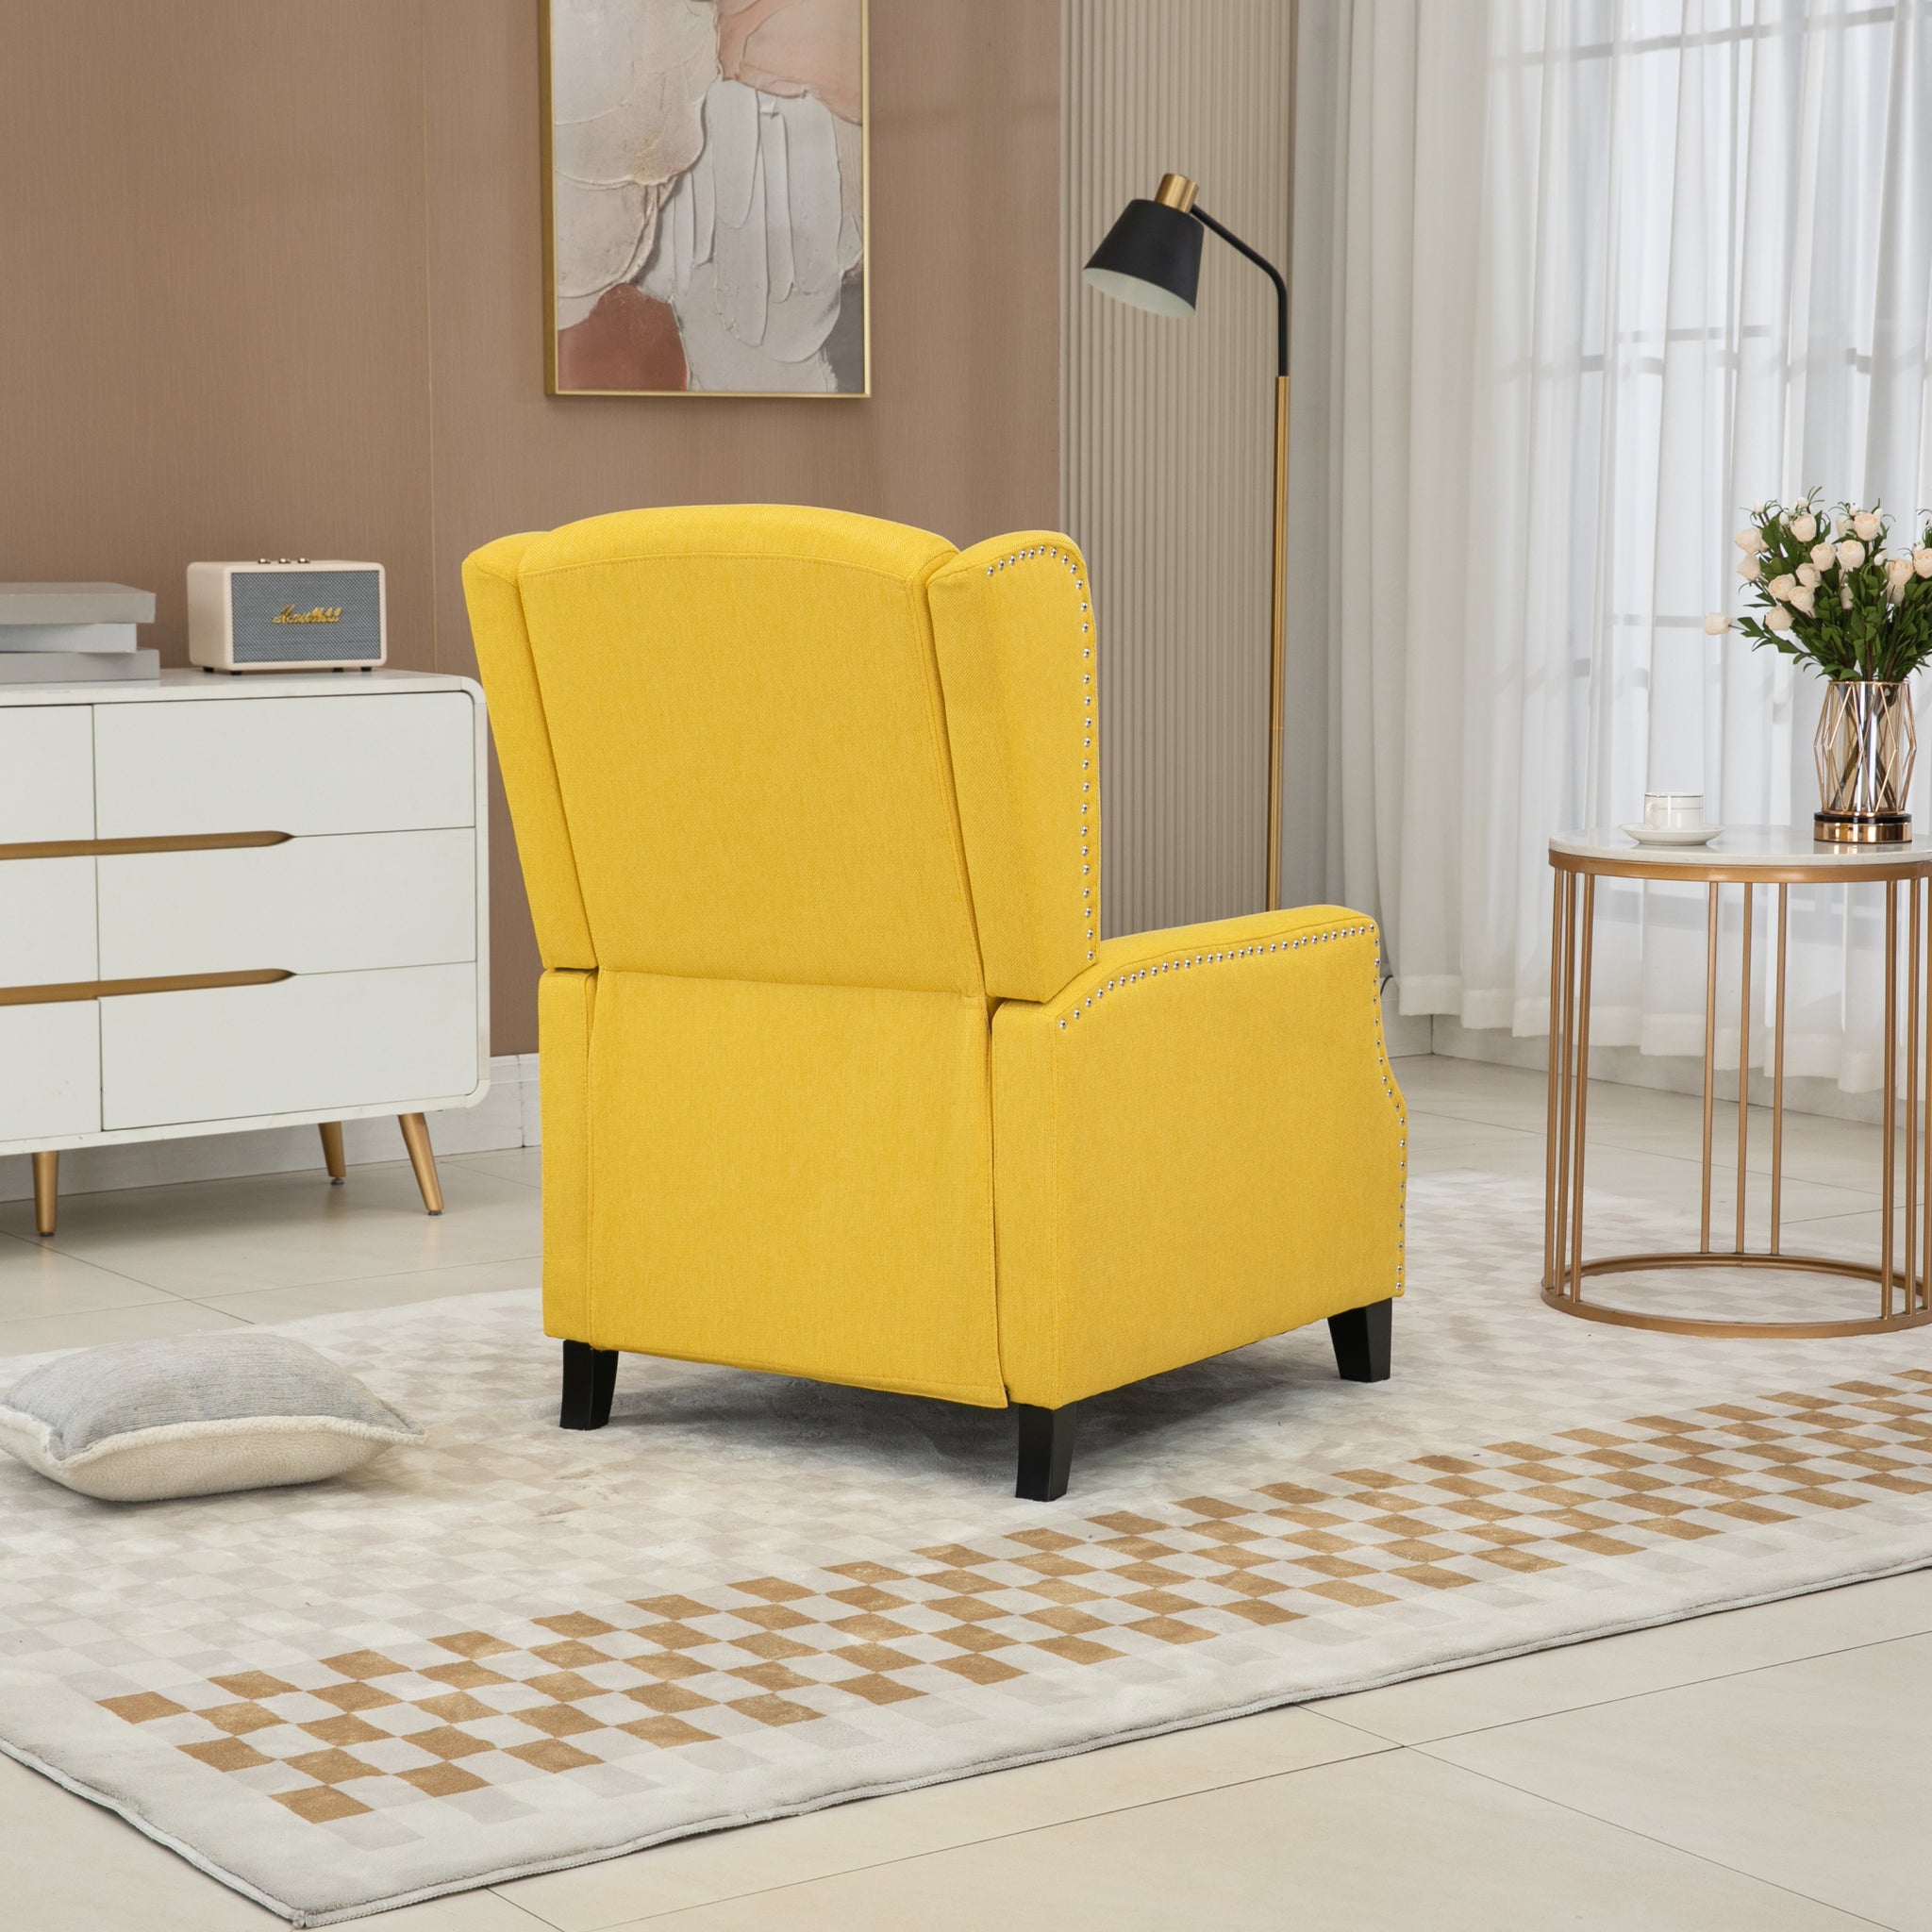 COOLMORE Modern Comfortable Upholstered leisure chair yellow-linen